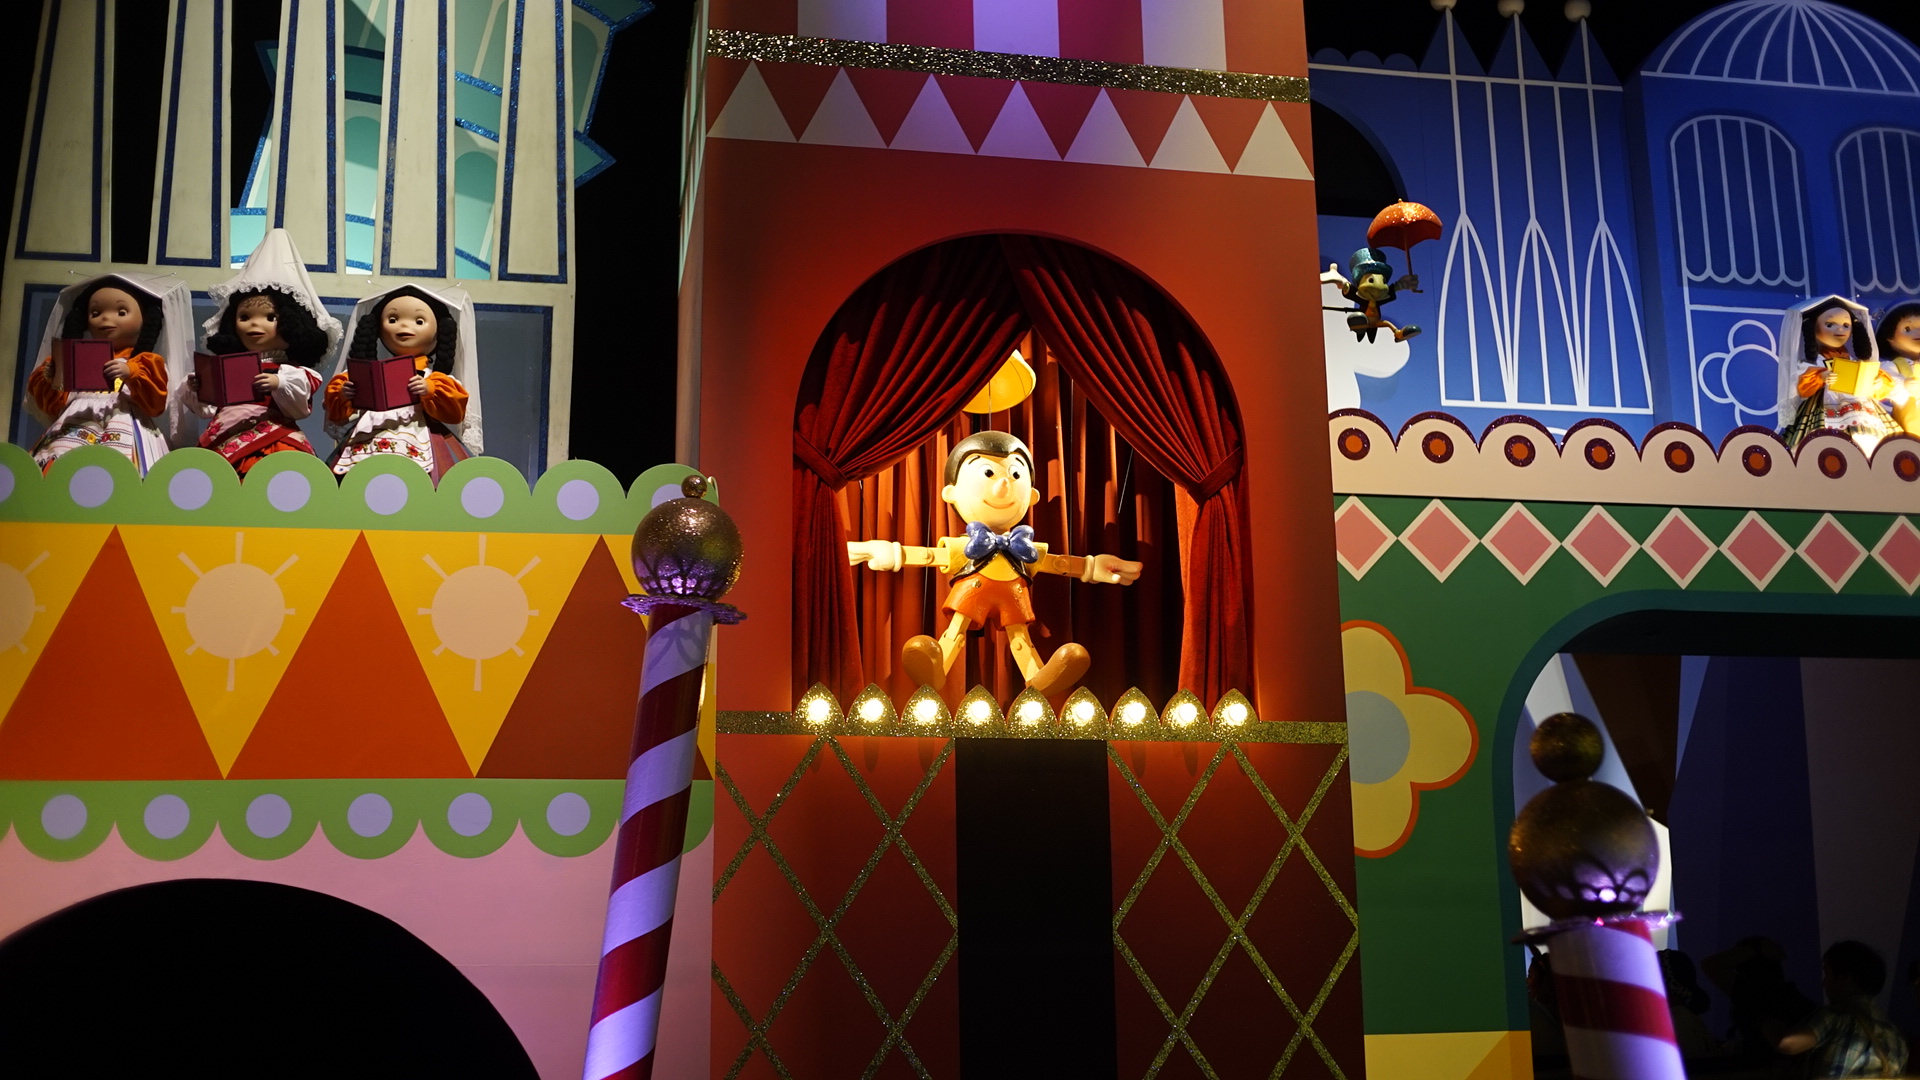 It S A Small World At Magic Kingdom Adding Disney Characters To The Attraction For Walt Disney World S 50th Anniversary Wdw News Today - roblox a very cool its a small world recreation in